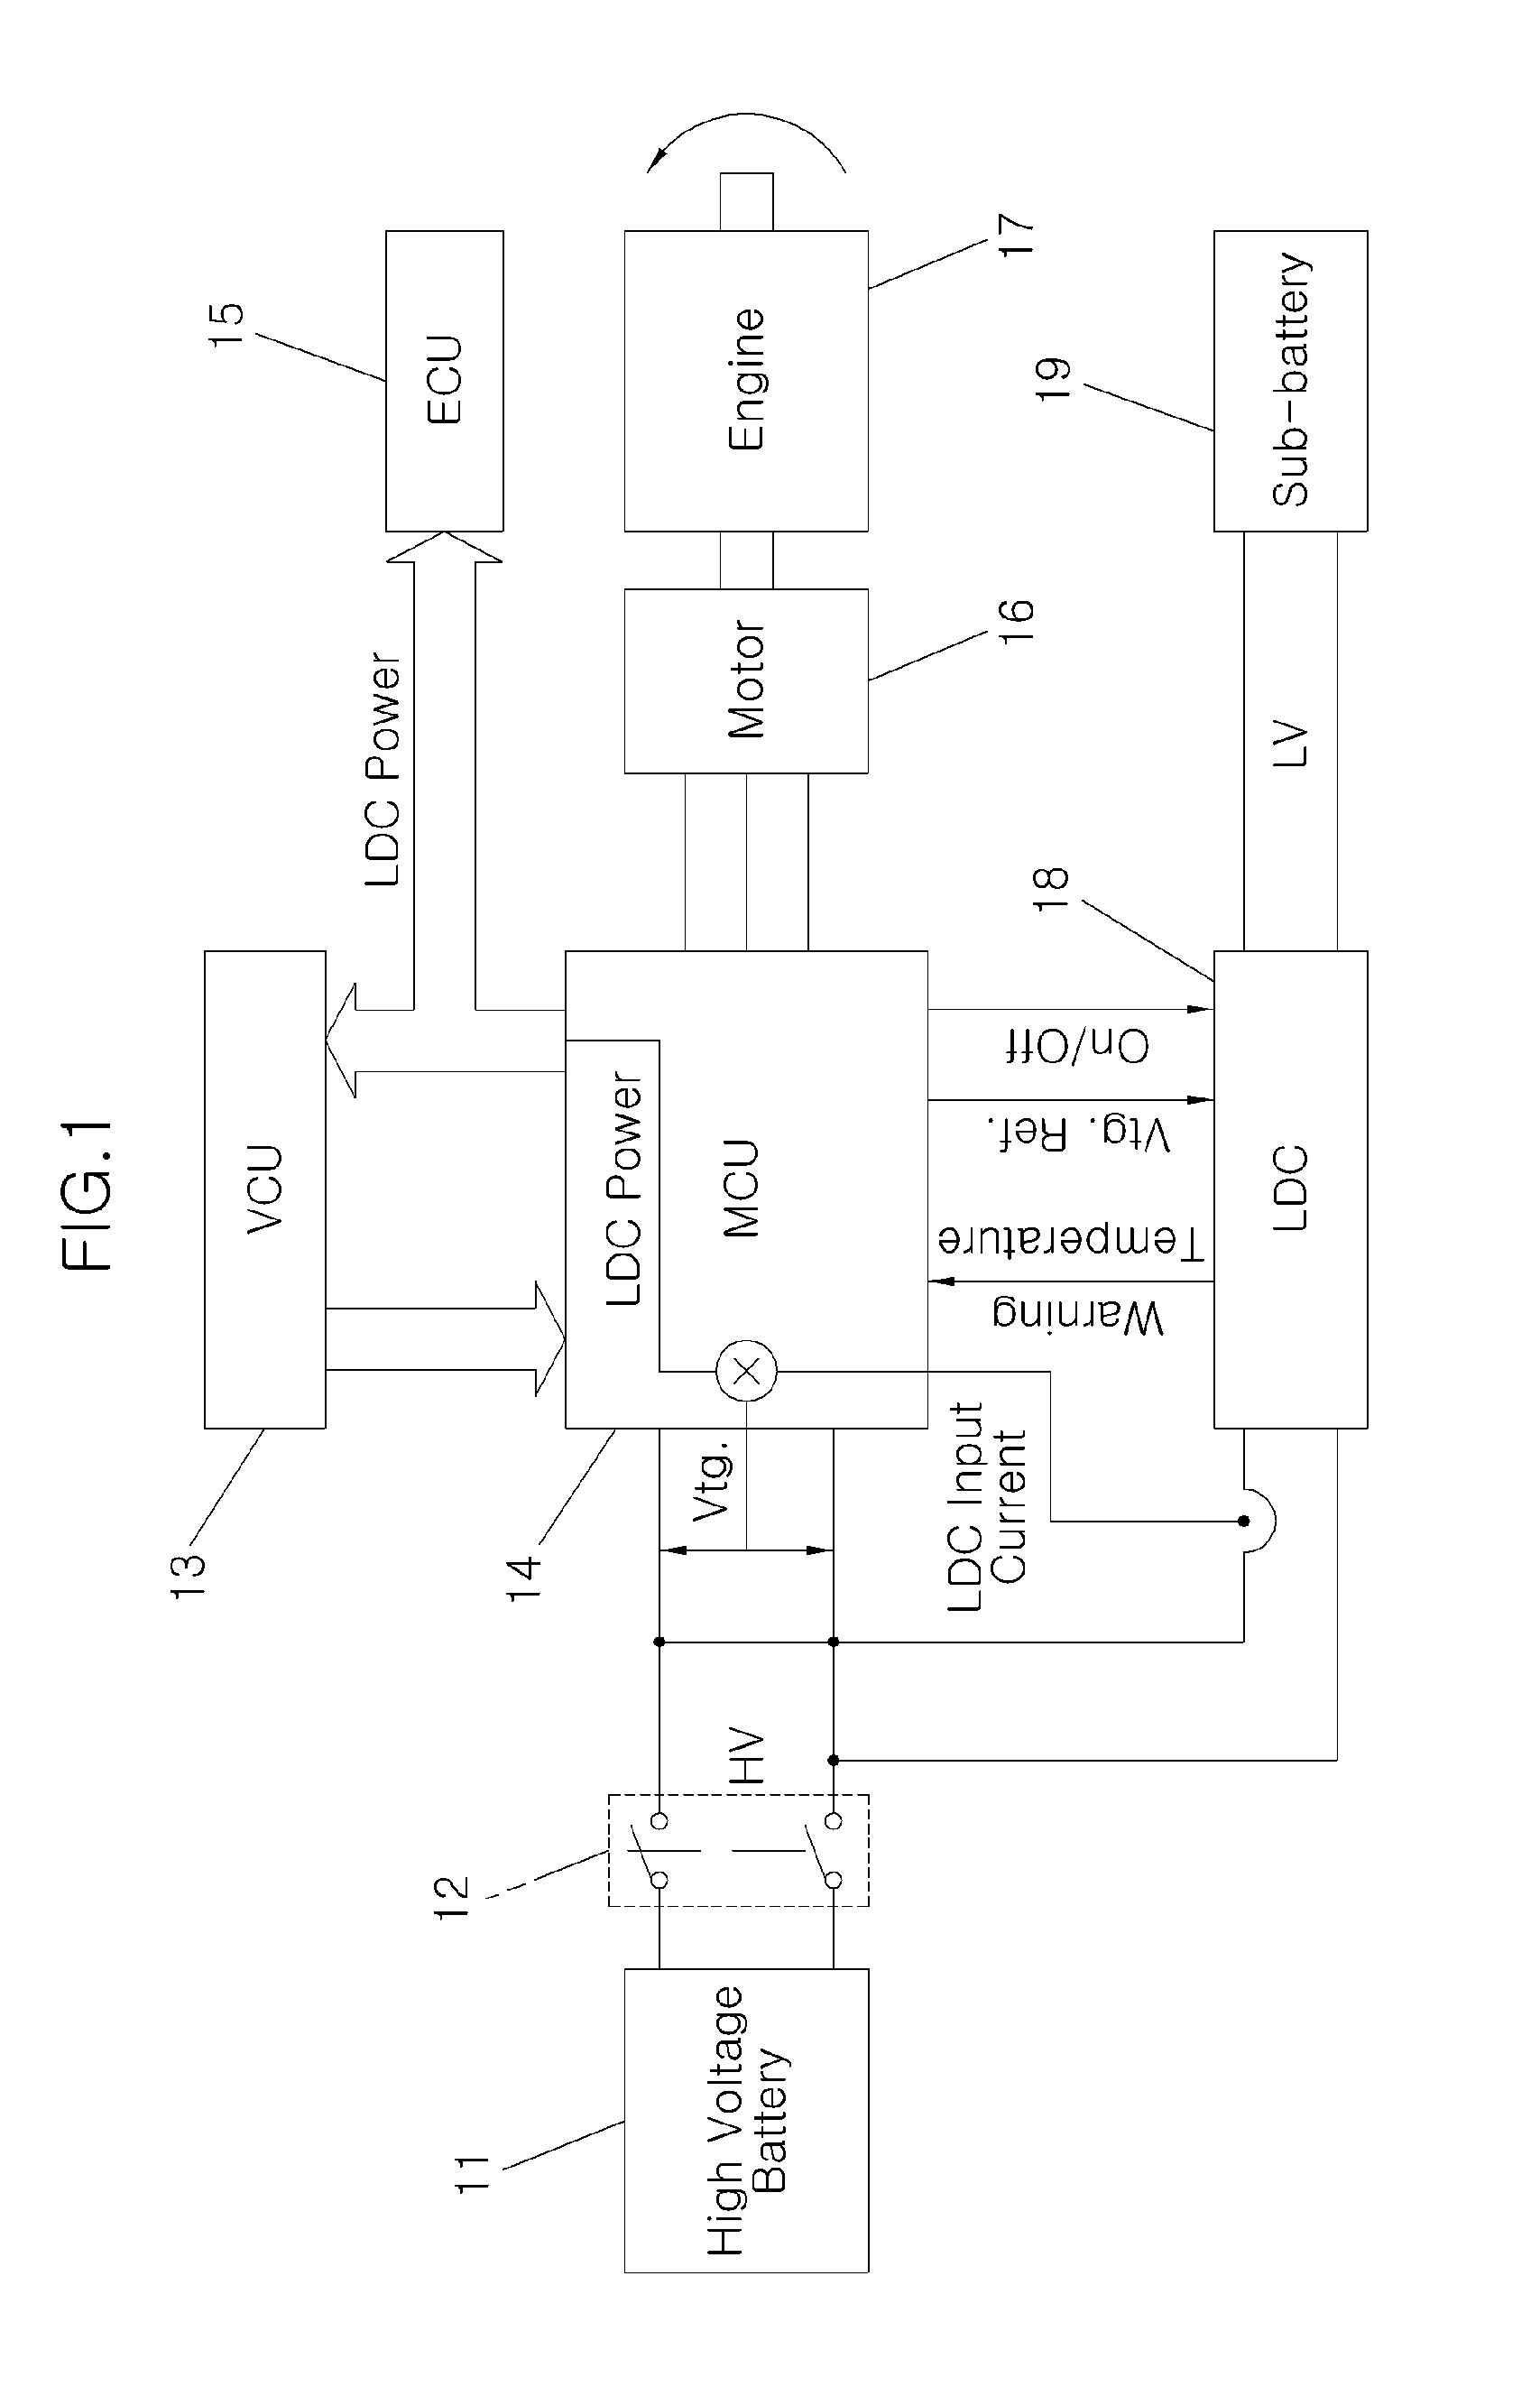 Active control system for low dc/dc converter in an electric vehicle